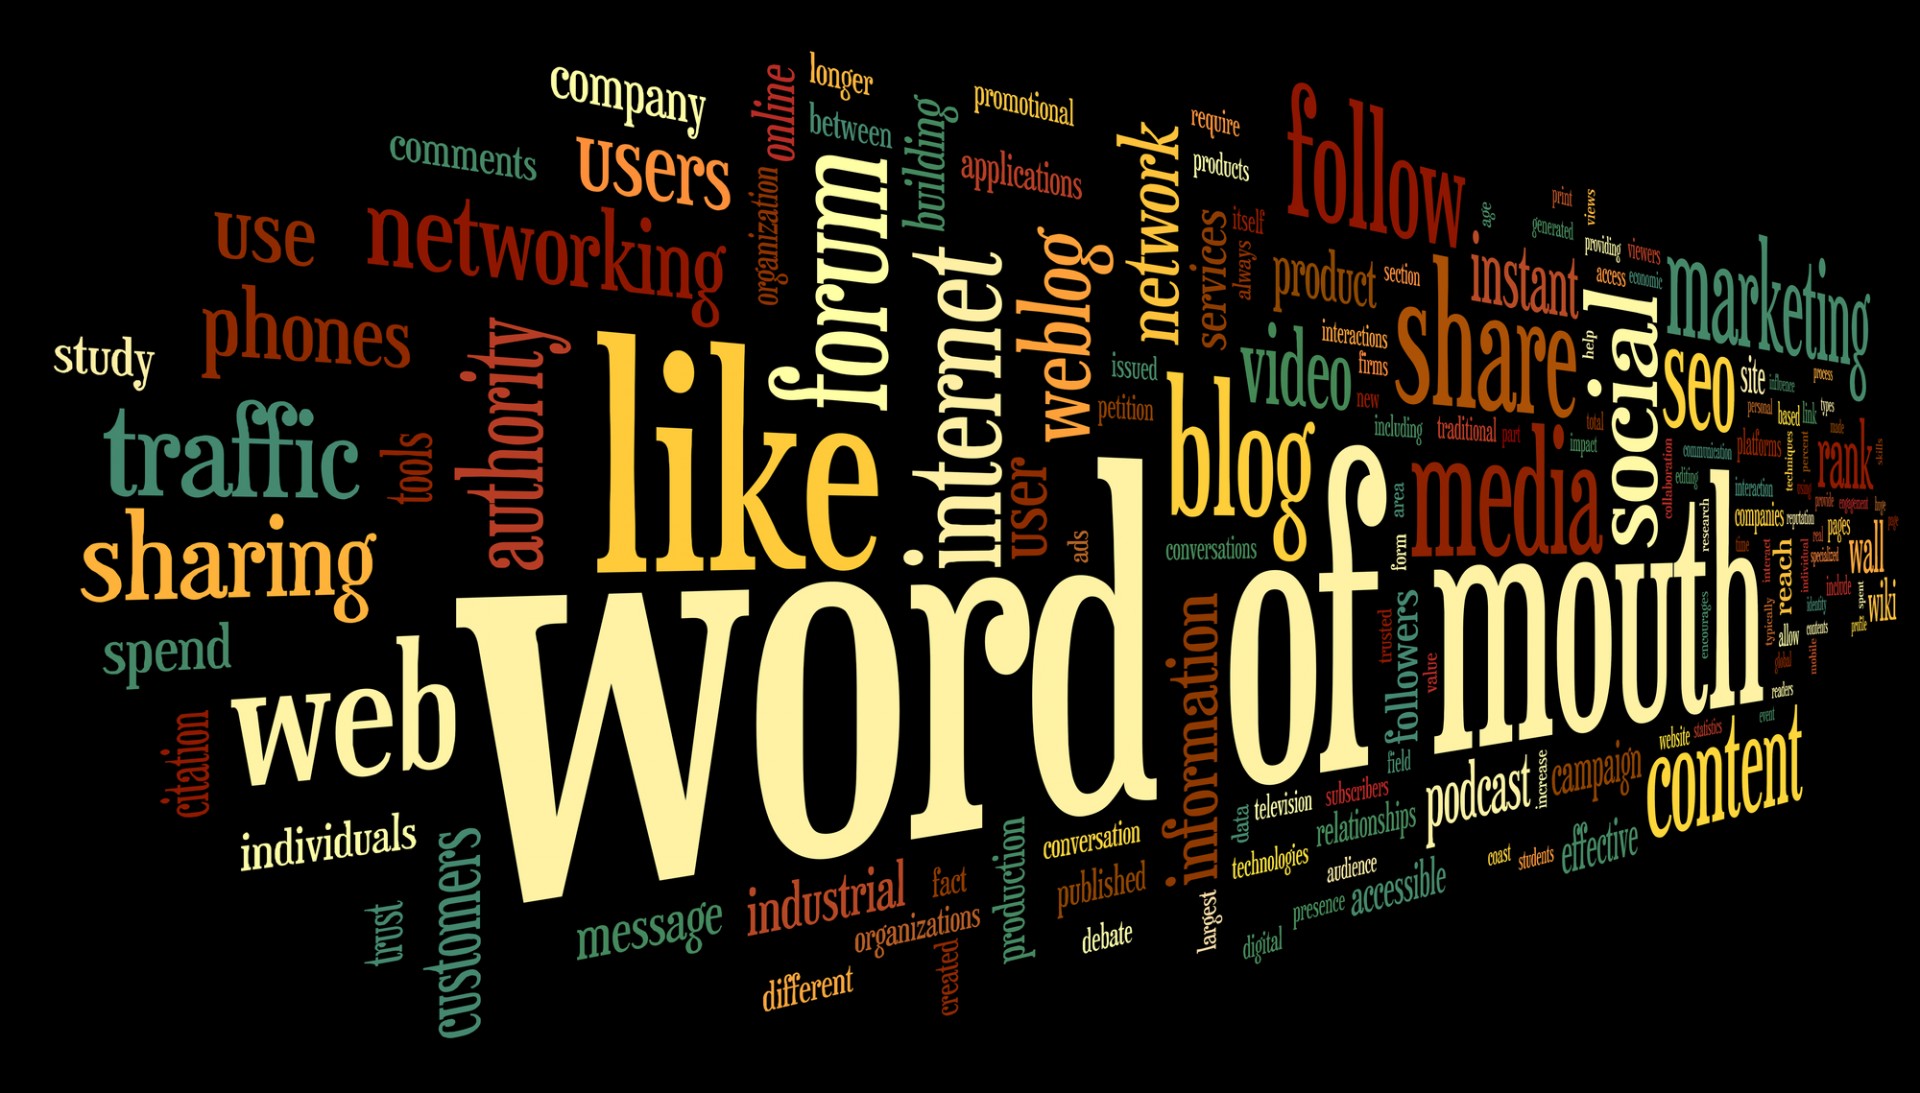 The Holy Grail: Word of Mouth Marketing